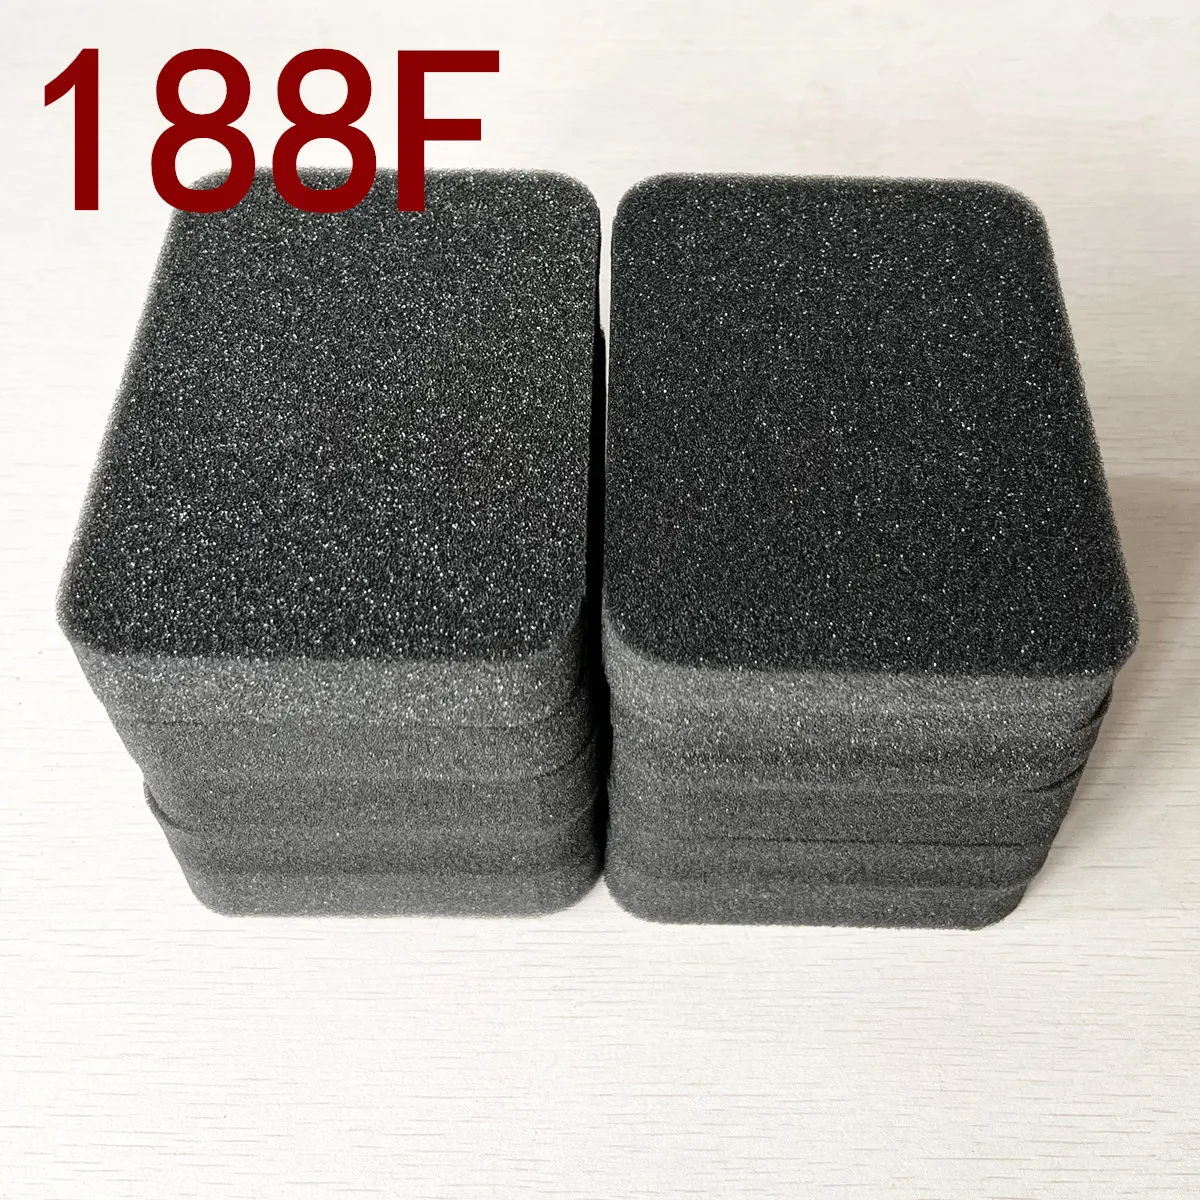 10Pcs/lot Air Filter Cleaner Fit Honda GX390 188F 5KW 4-Stroke Small Engine Gasoline Generator Parts